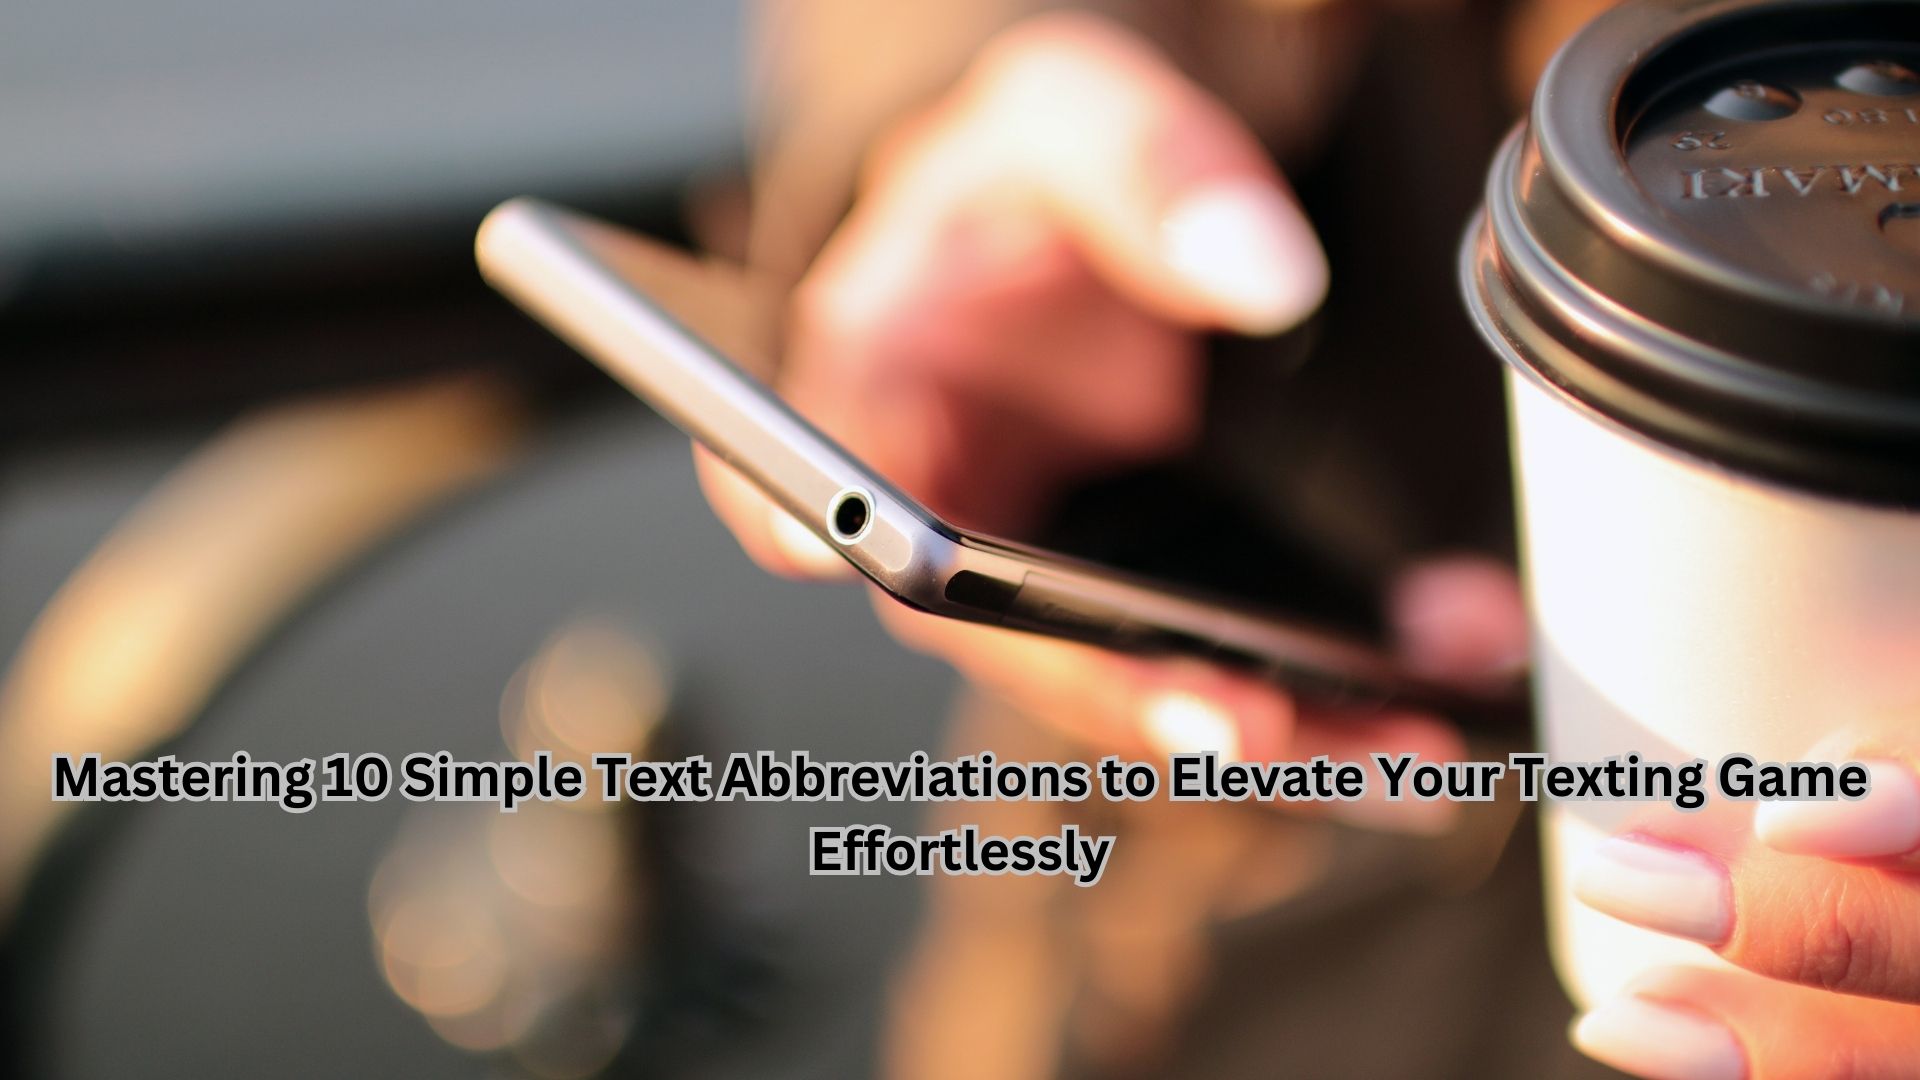 Mastering 10 Simple Text Abbreviations to Elevate Your Texting Game Effortlessly